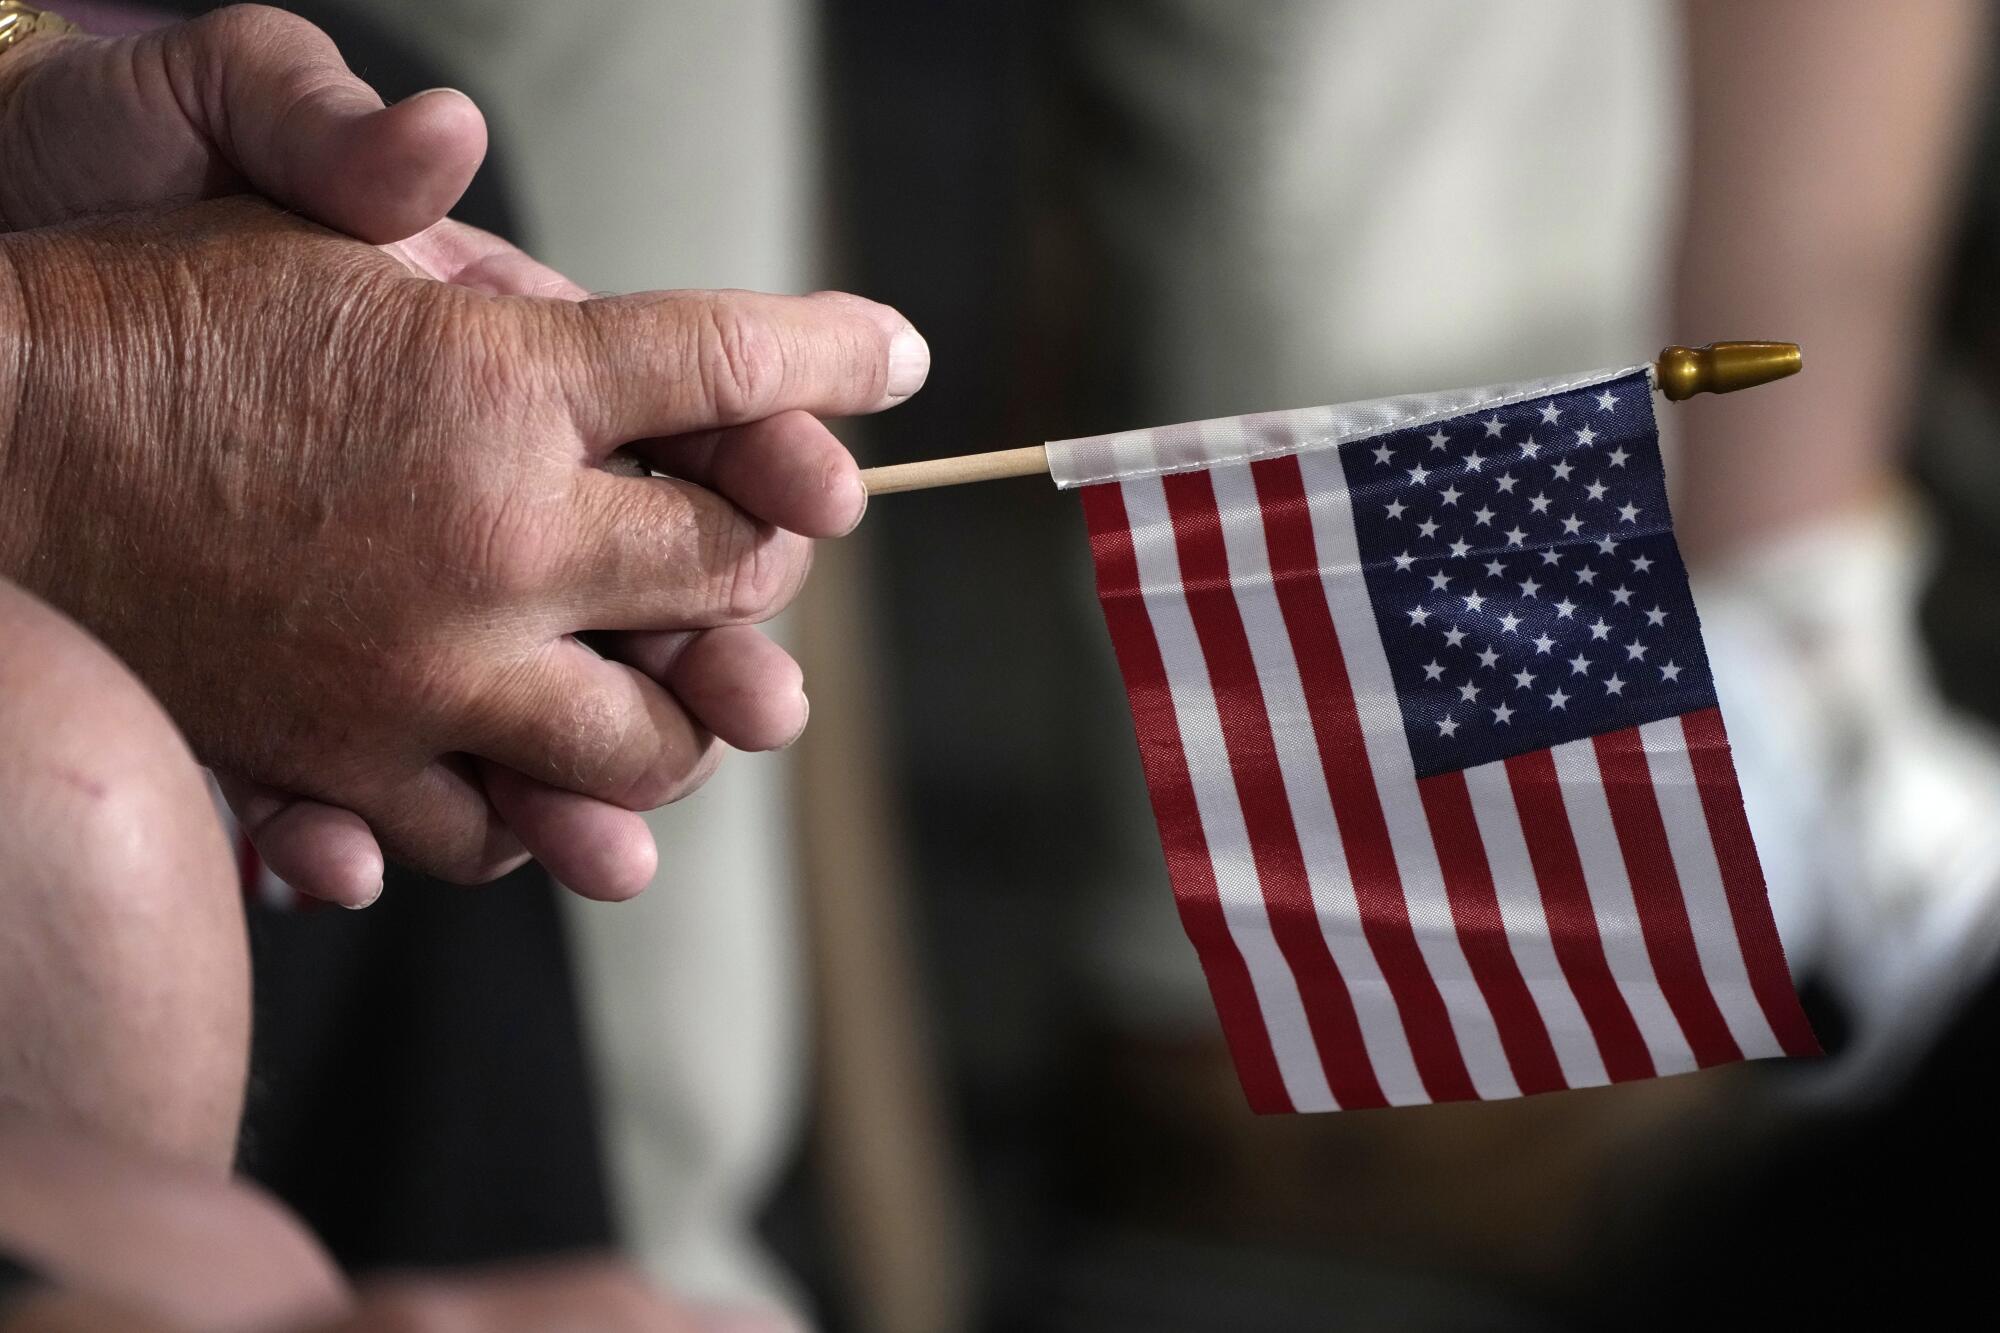 A closeup of hands holding a small American flag.